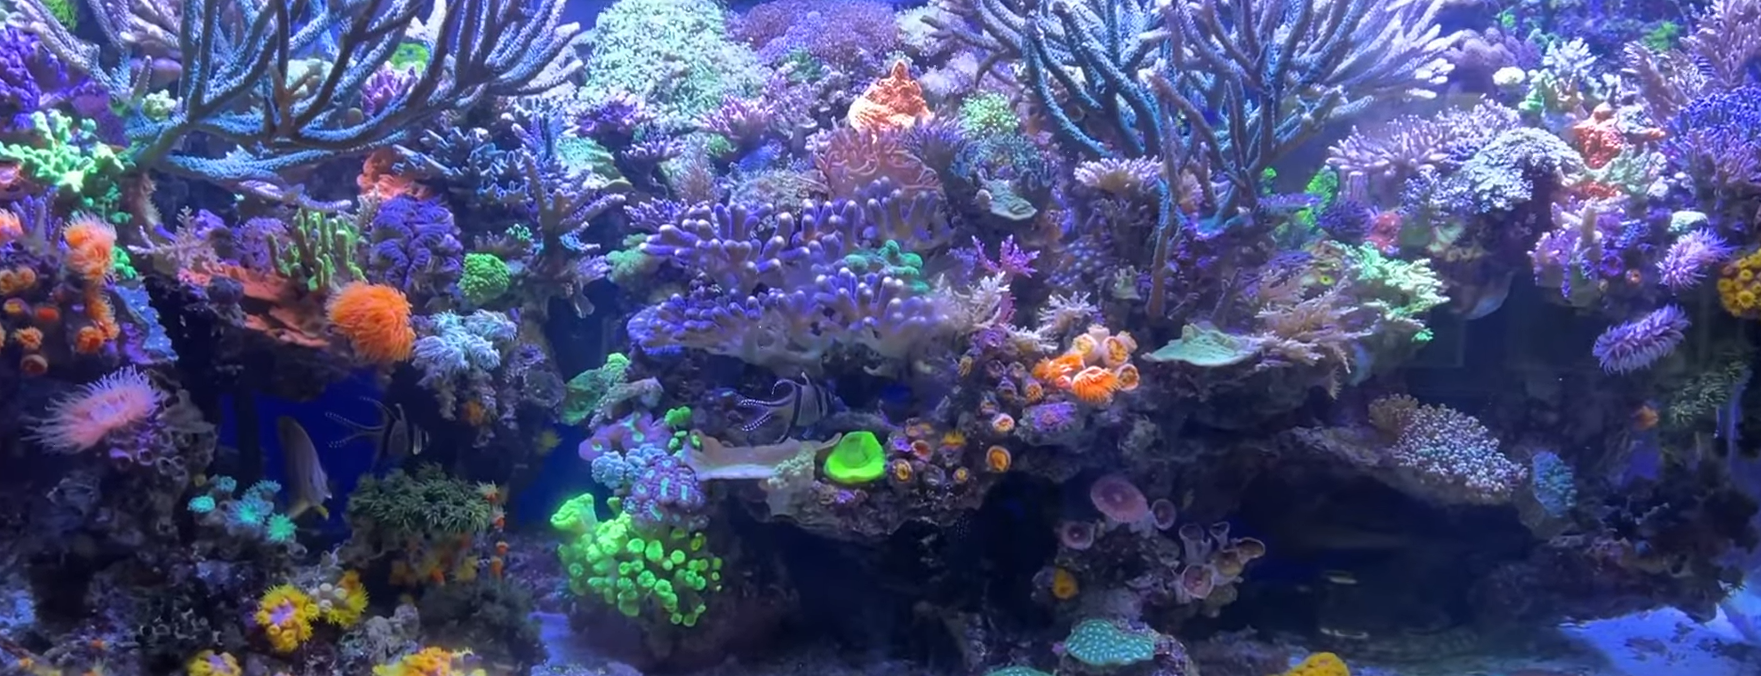 Rich Ross’s Home Reef Aquarium: Assessing and Planning for the Future.